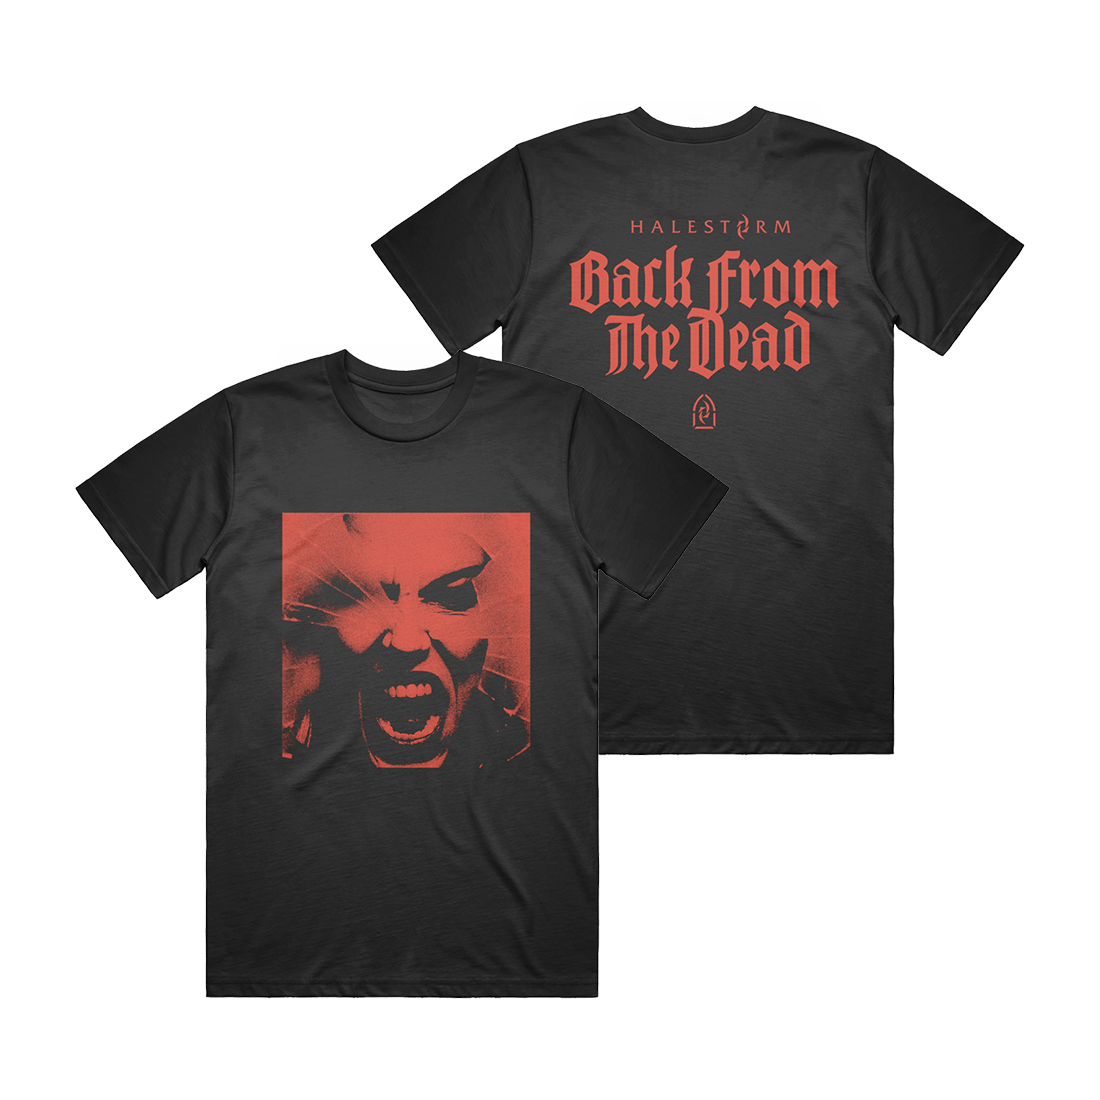 Back From the Dead Album T-Shirt | Warner Music Official Store